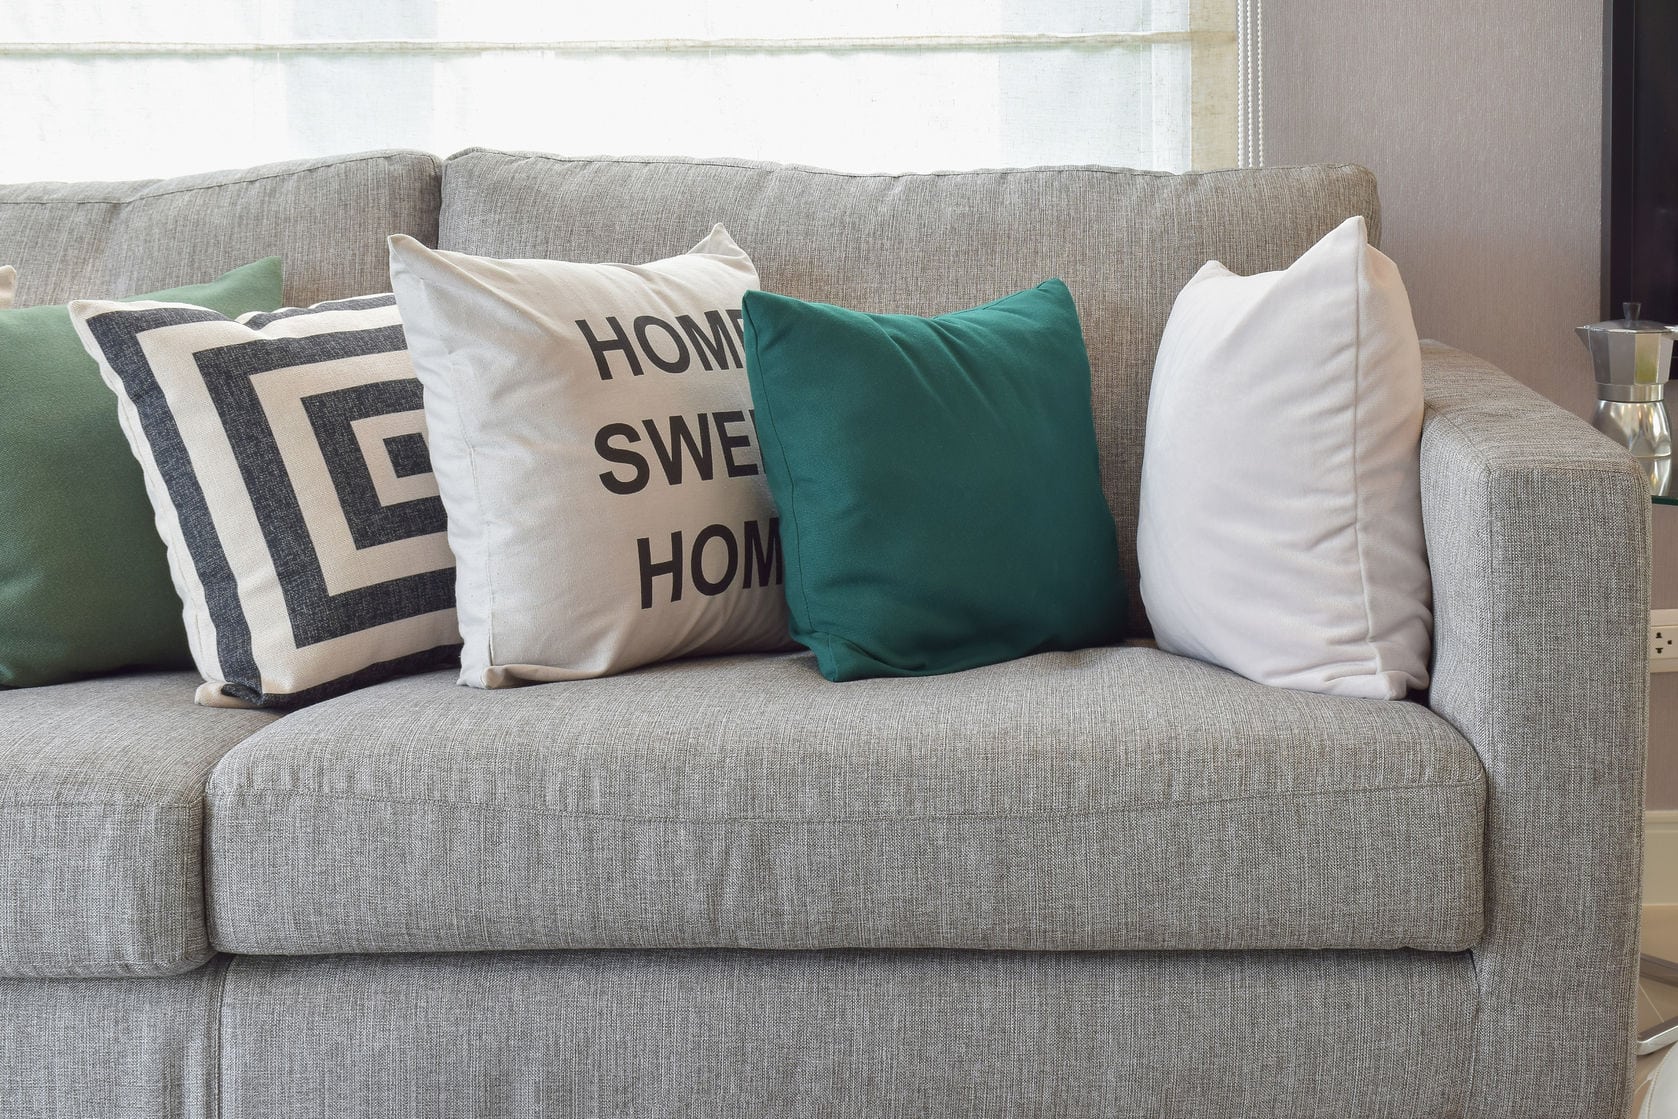 throw pillows on a gray couch